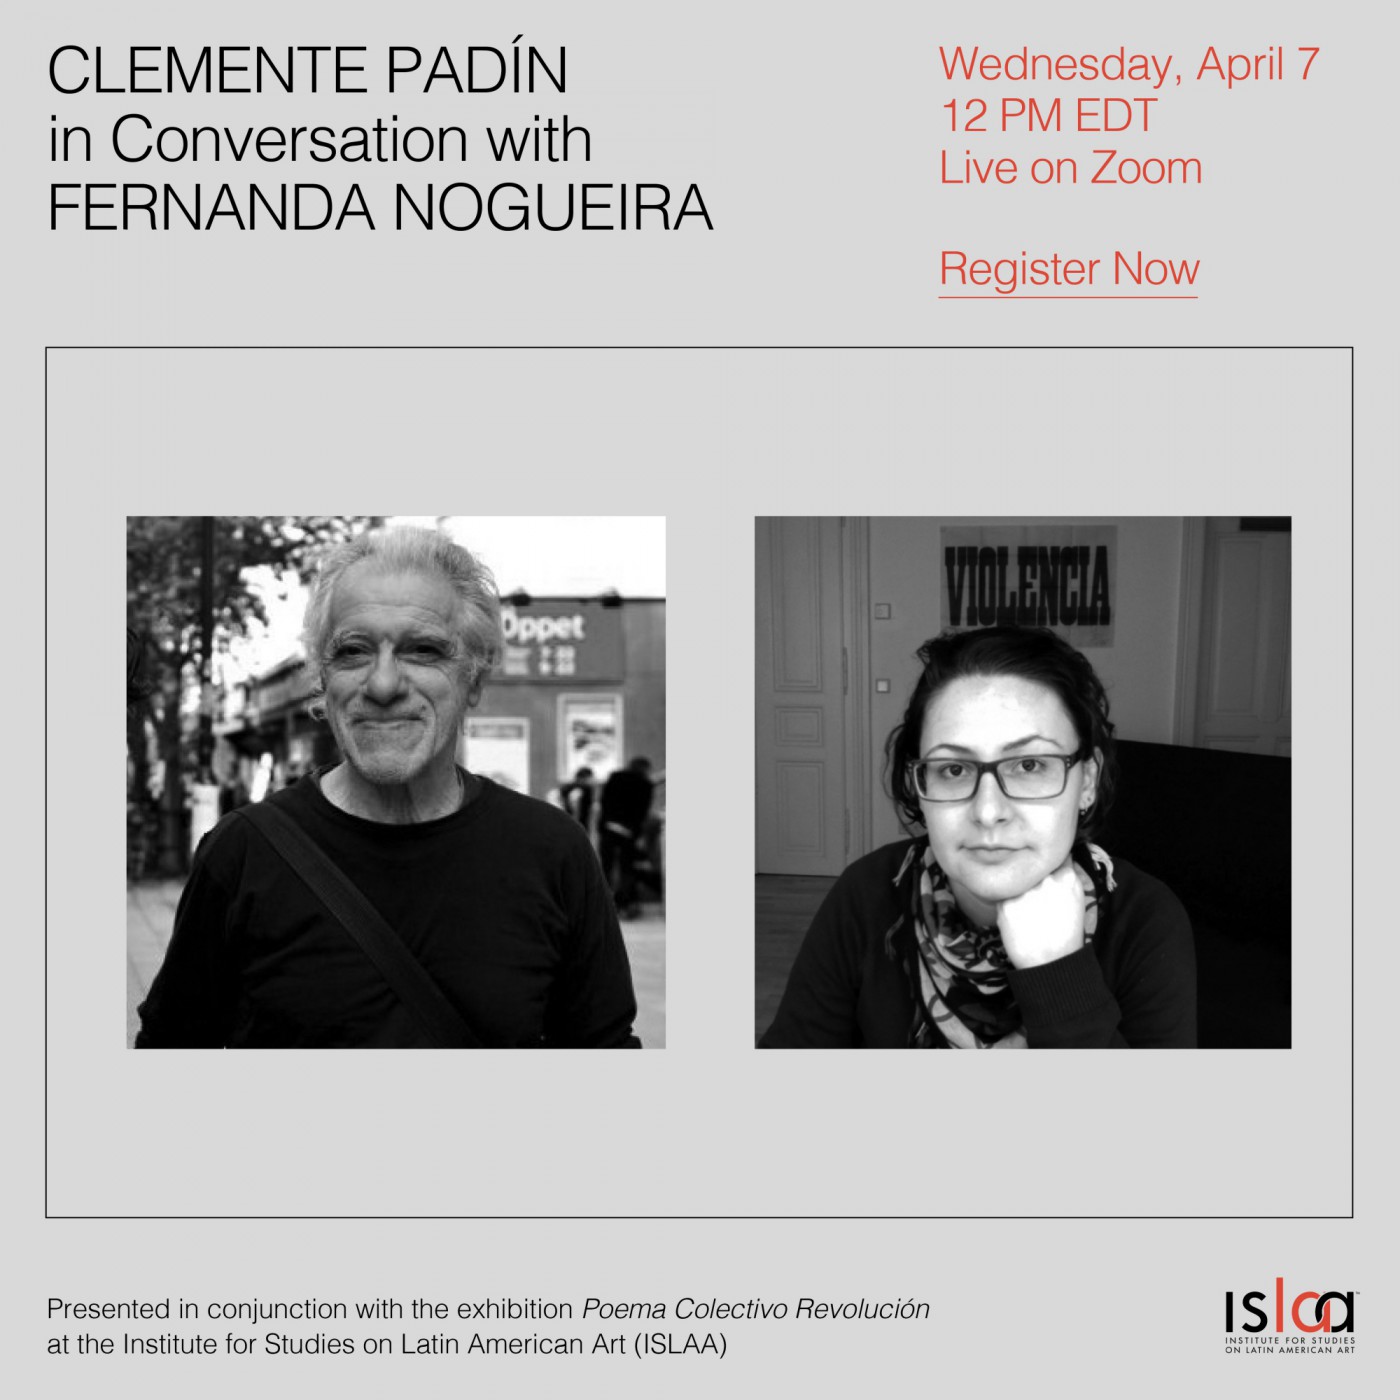 Event poster with a black and white portrait of Clemente Padín and a portrait of Fernanda Nogueira.